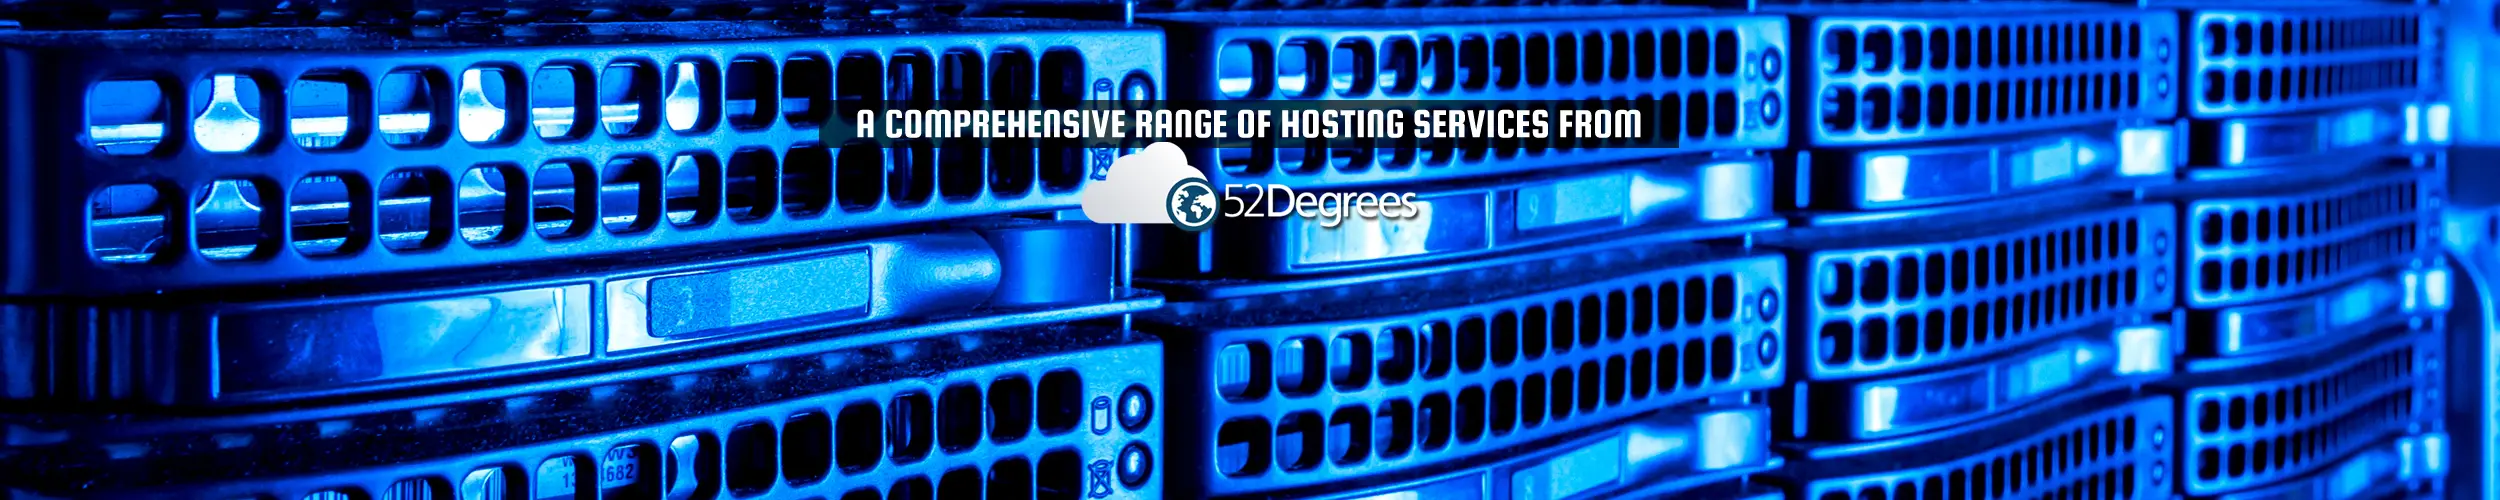 52Degrees About Us - feature image | "a comprehensive range of hosting services from 52Degrees" | close up of servers with a blue tint | Telecoms Solutions, Norwich